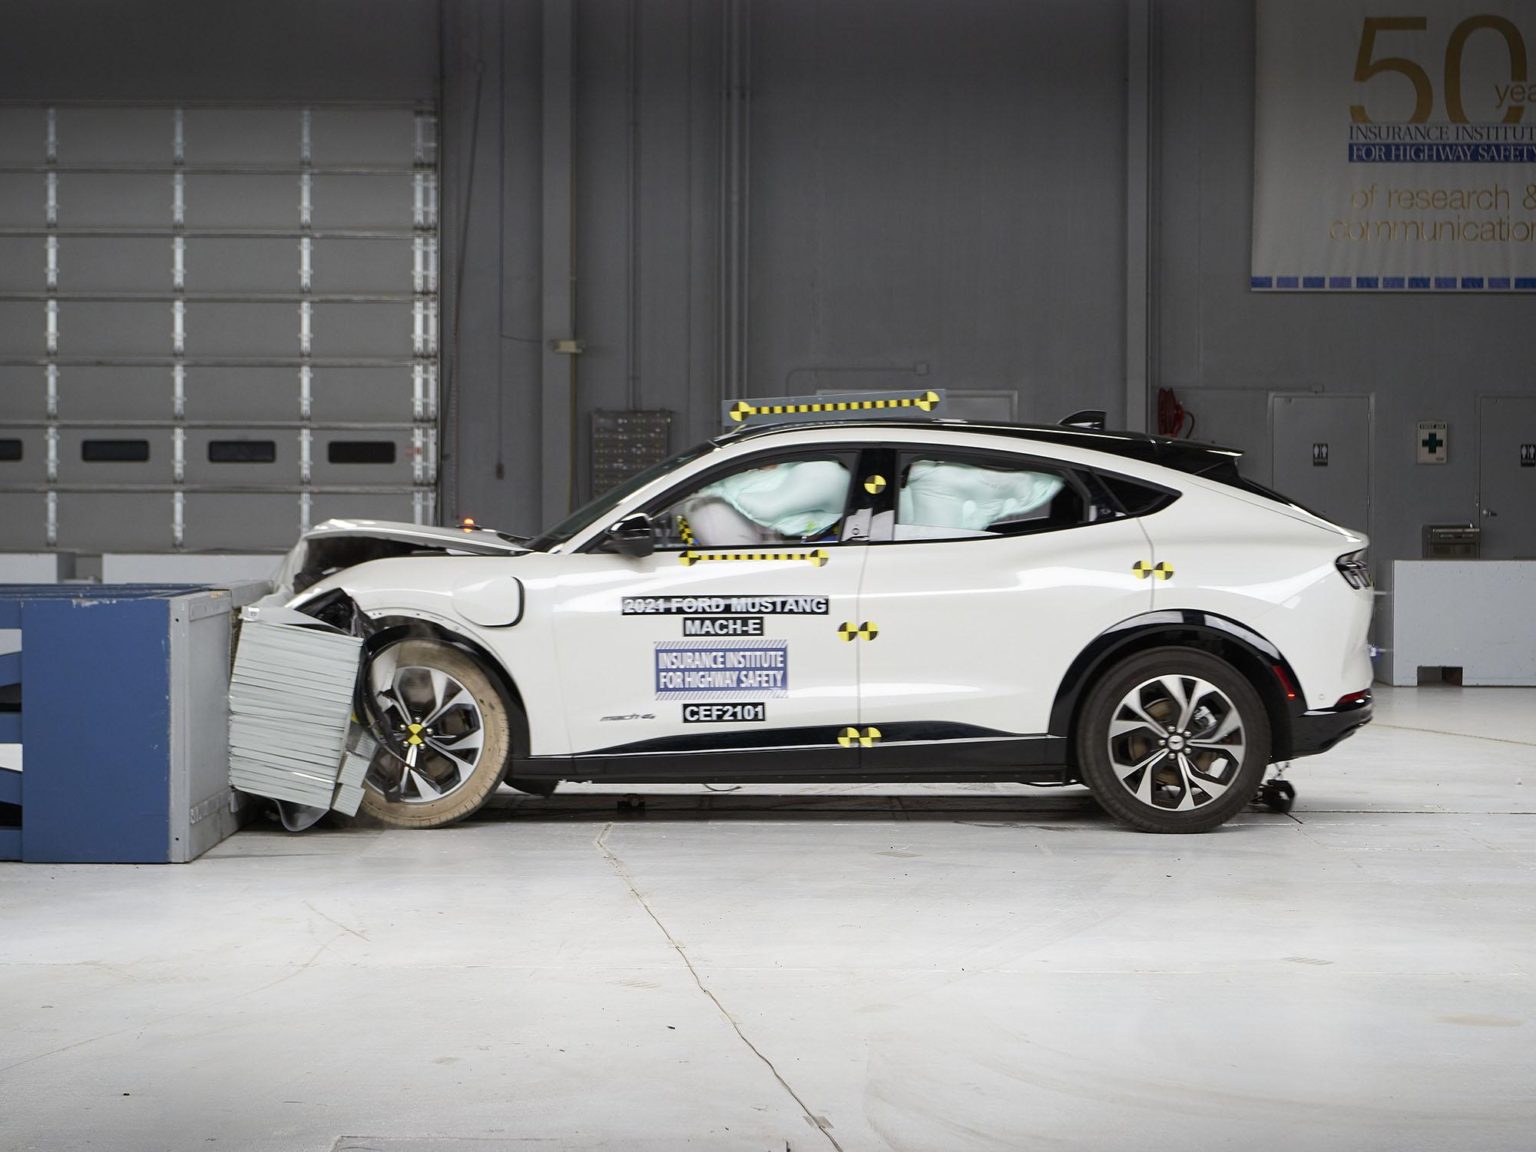 The Ford Mustang Mach-E did not perform as well as the Volvo XC40 Recharge in IIHS testing.